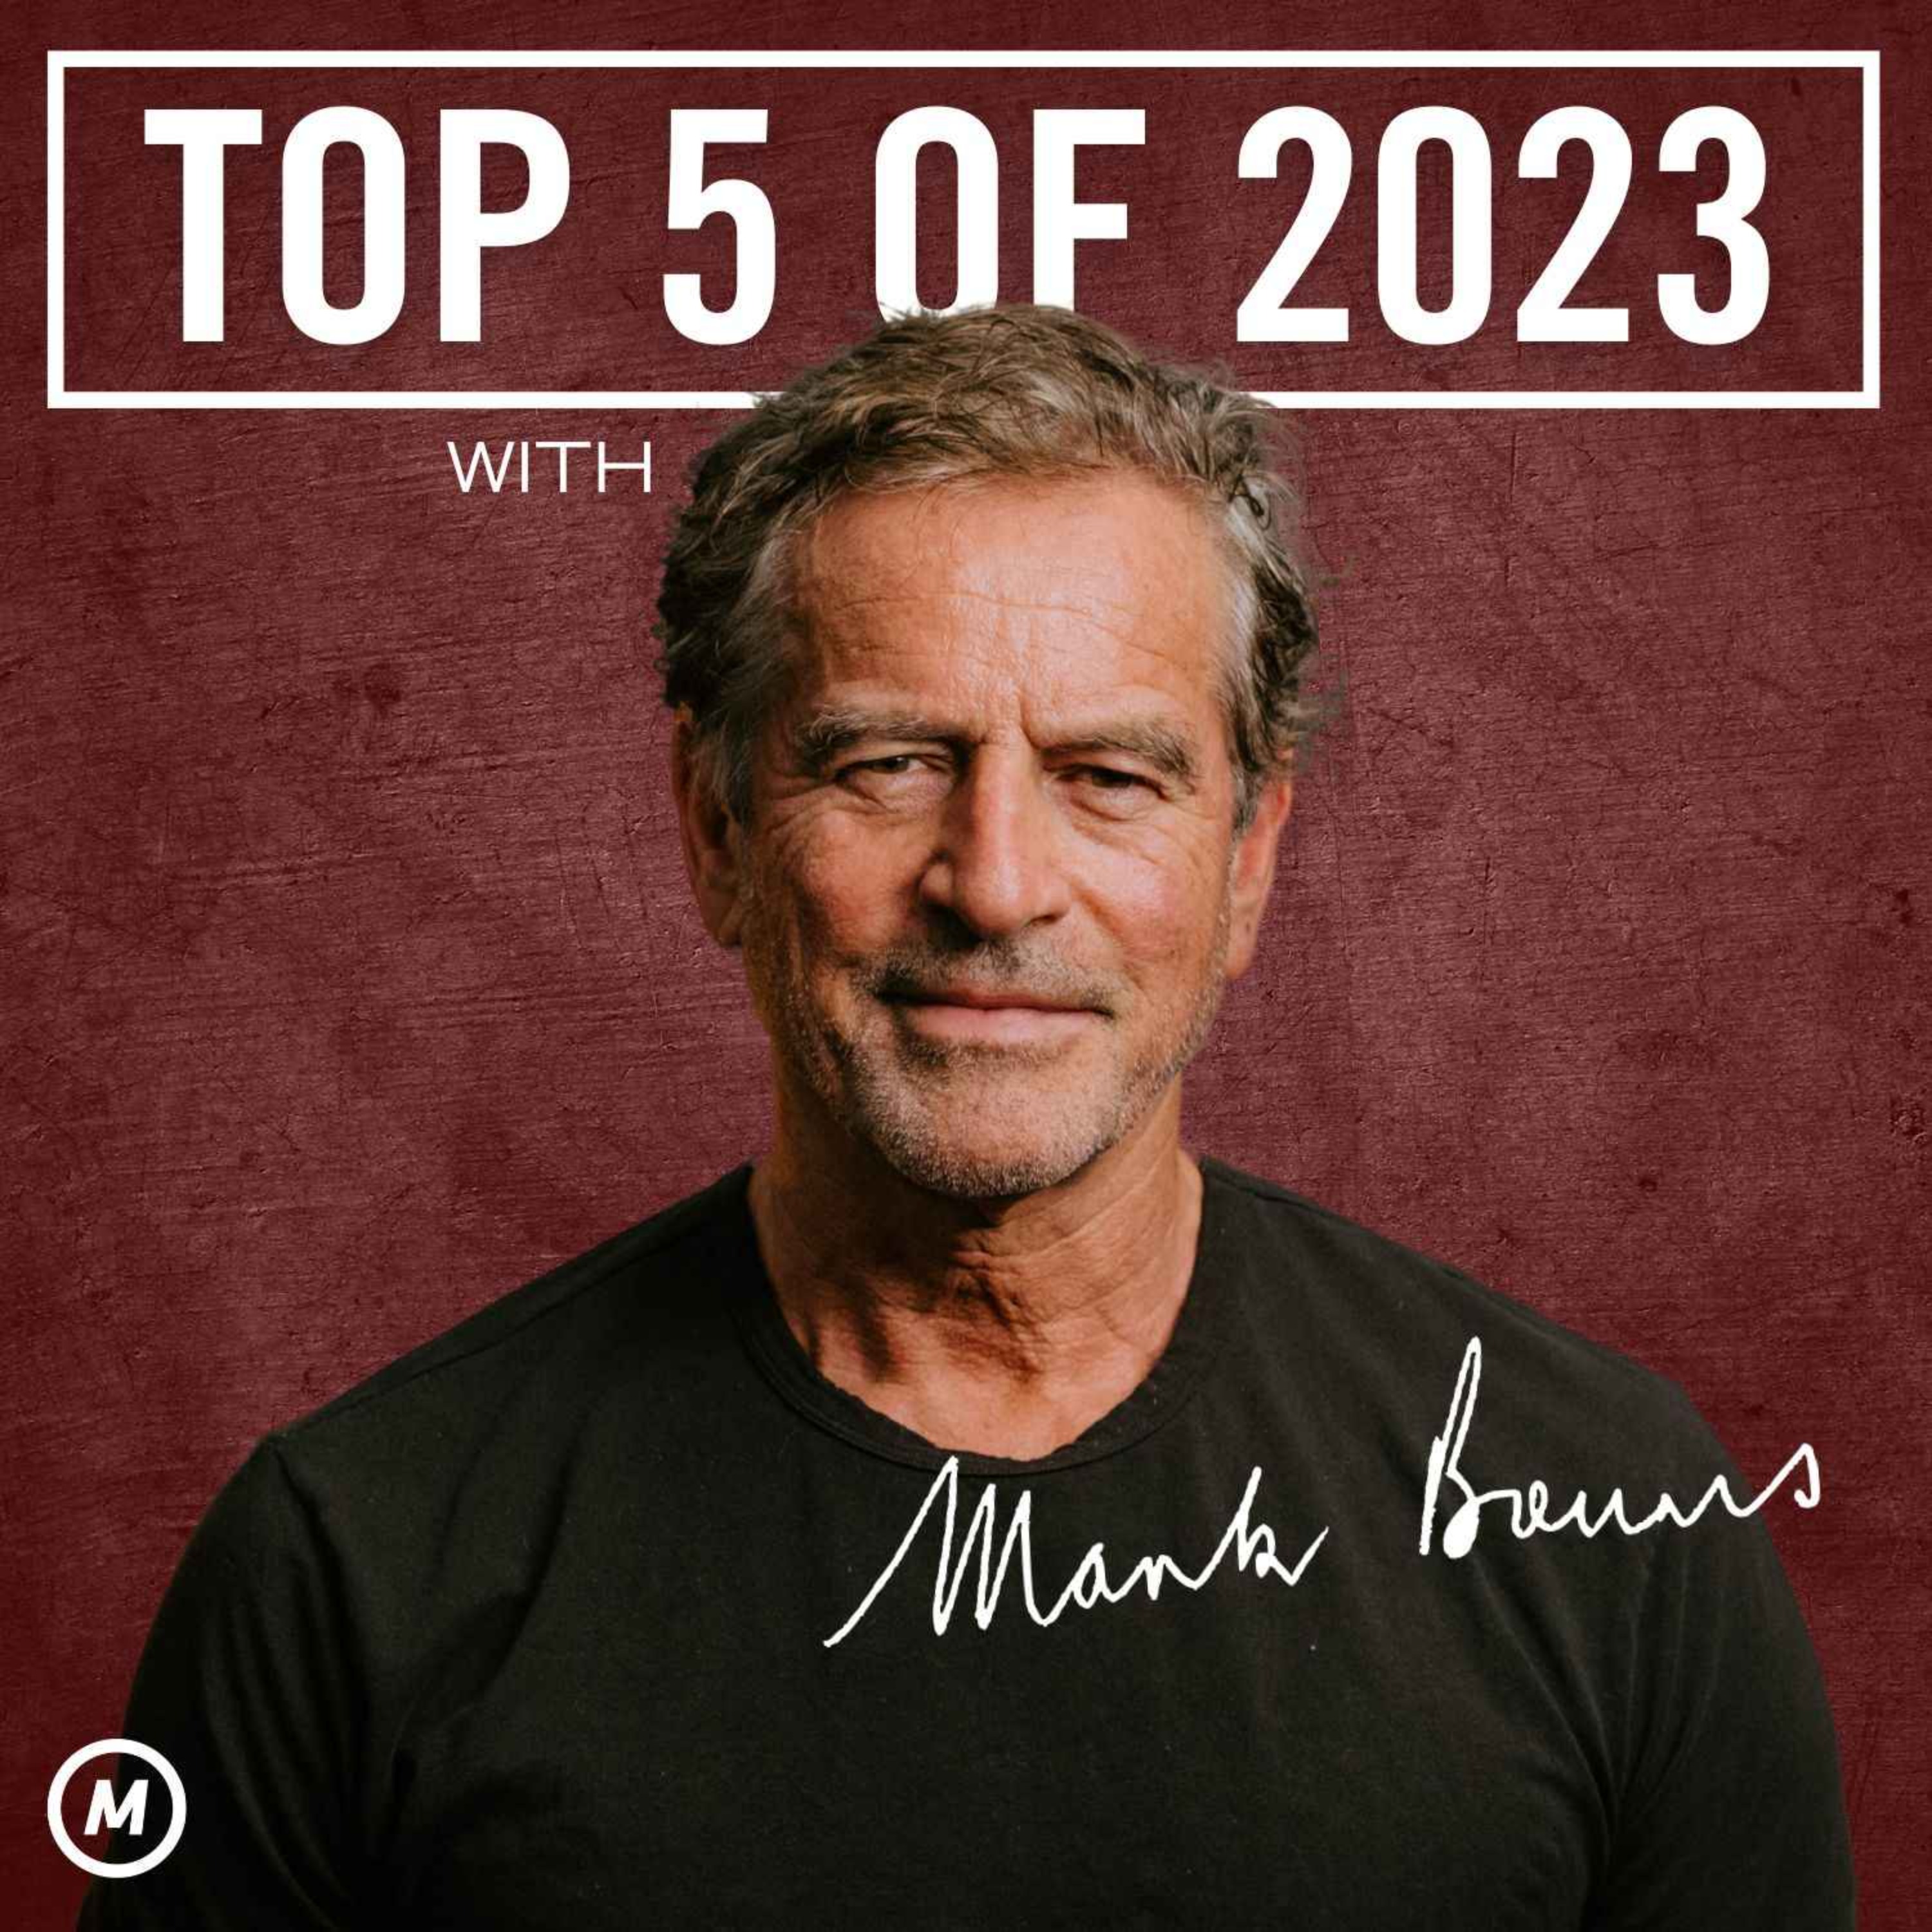 Your Top 5 Guests Of 2023